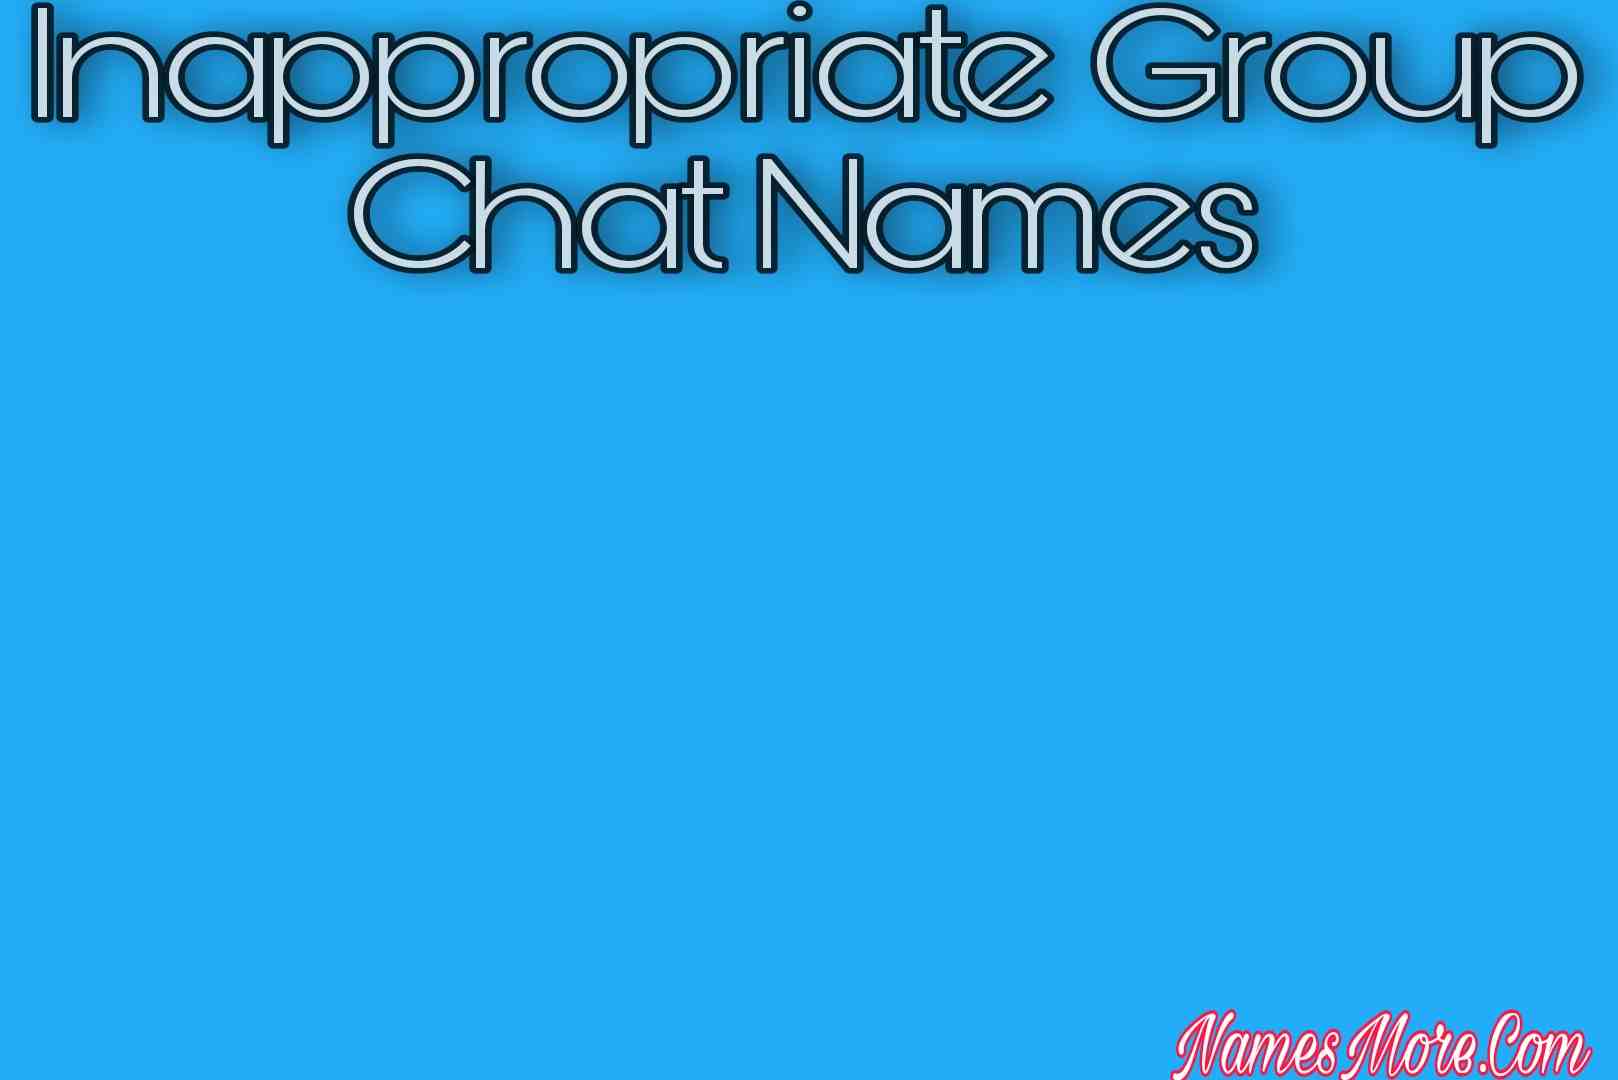 600-inappropriate-group-chat-names-best-cool-unique